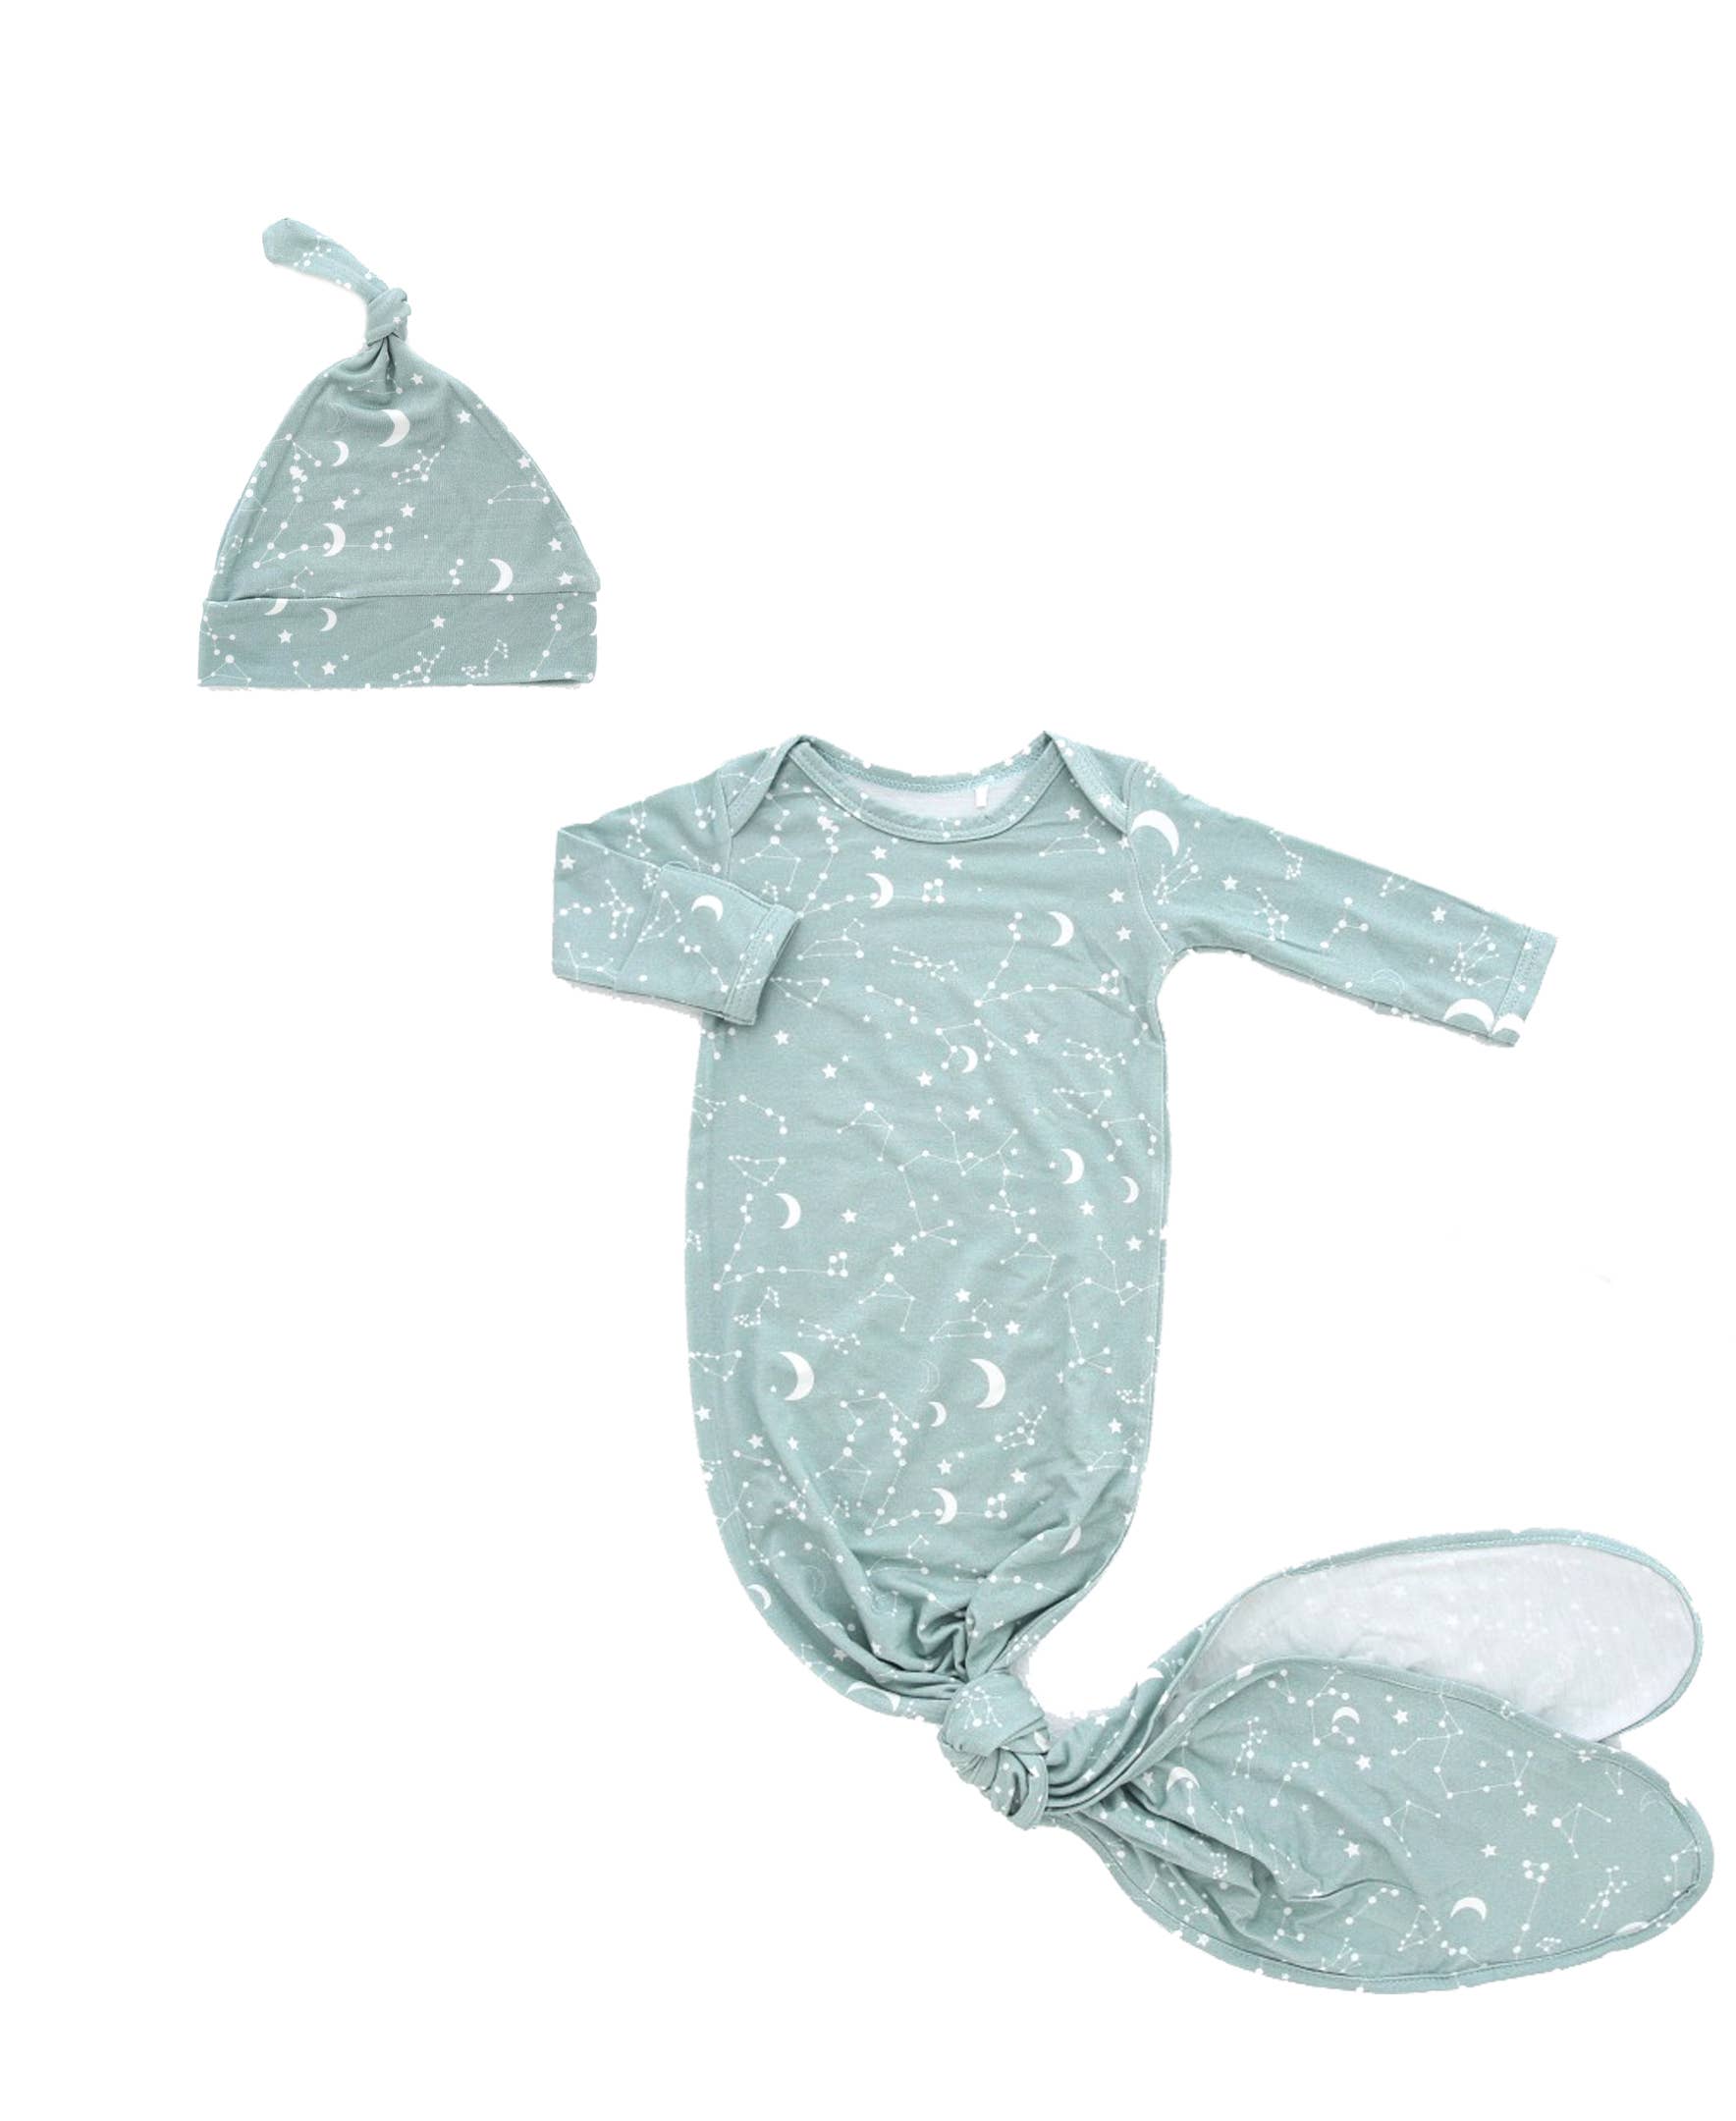 Emerson and Friends - Stargazer Bamboo Knotted Baby Gown Newborn Baby Gift Set